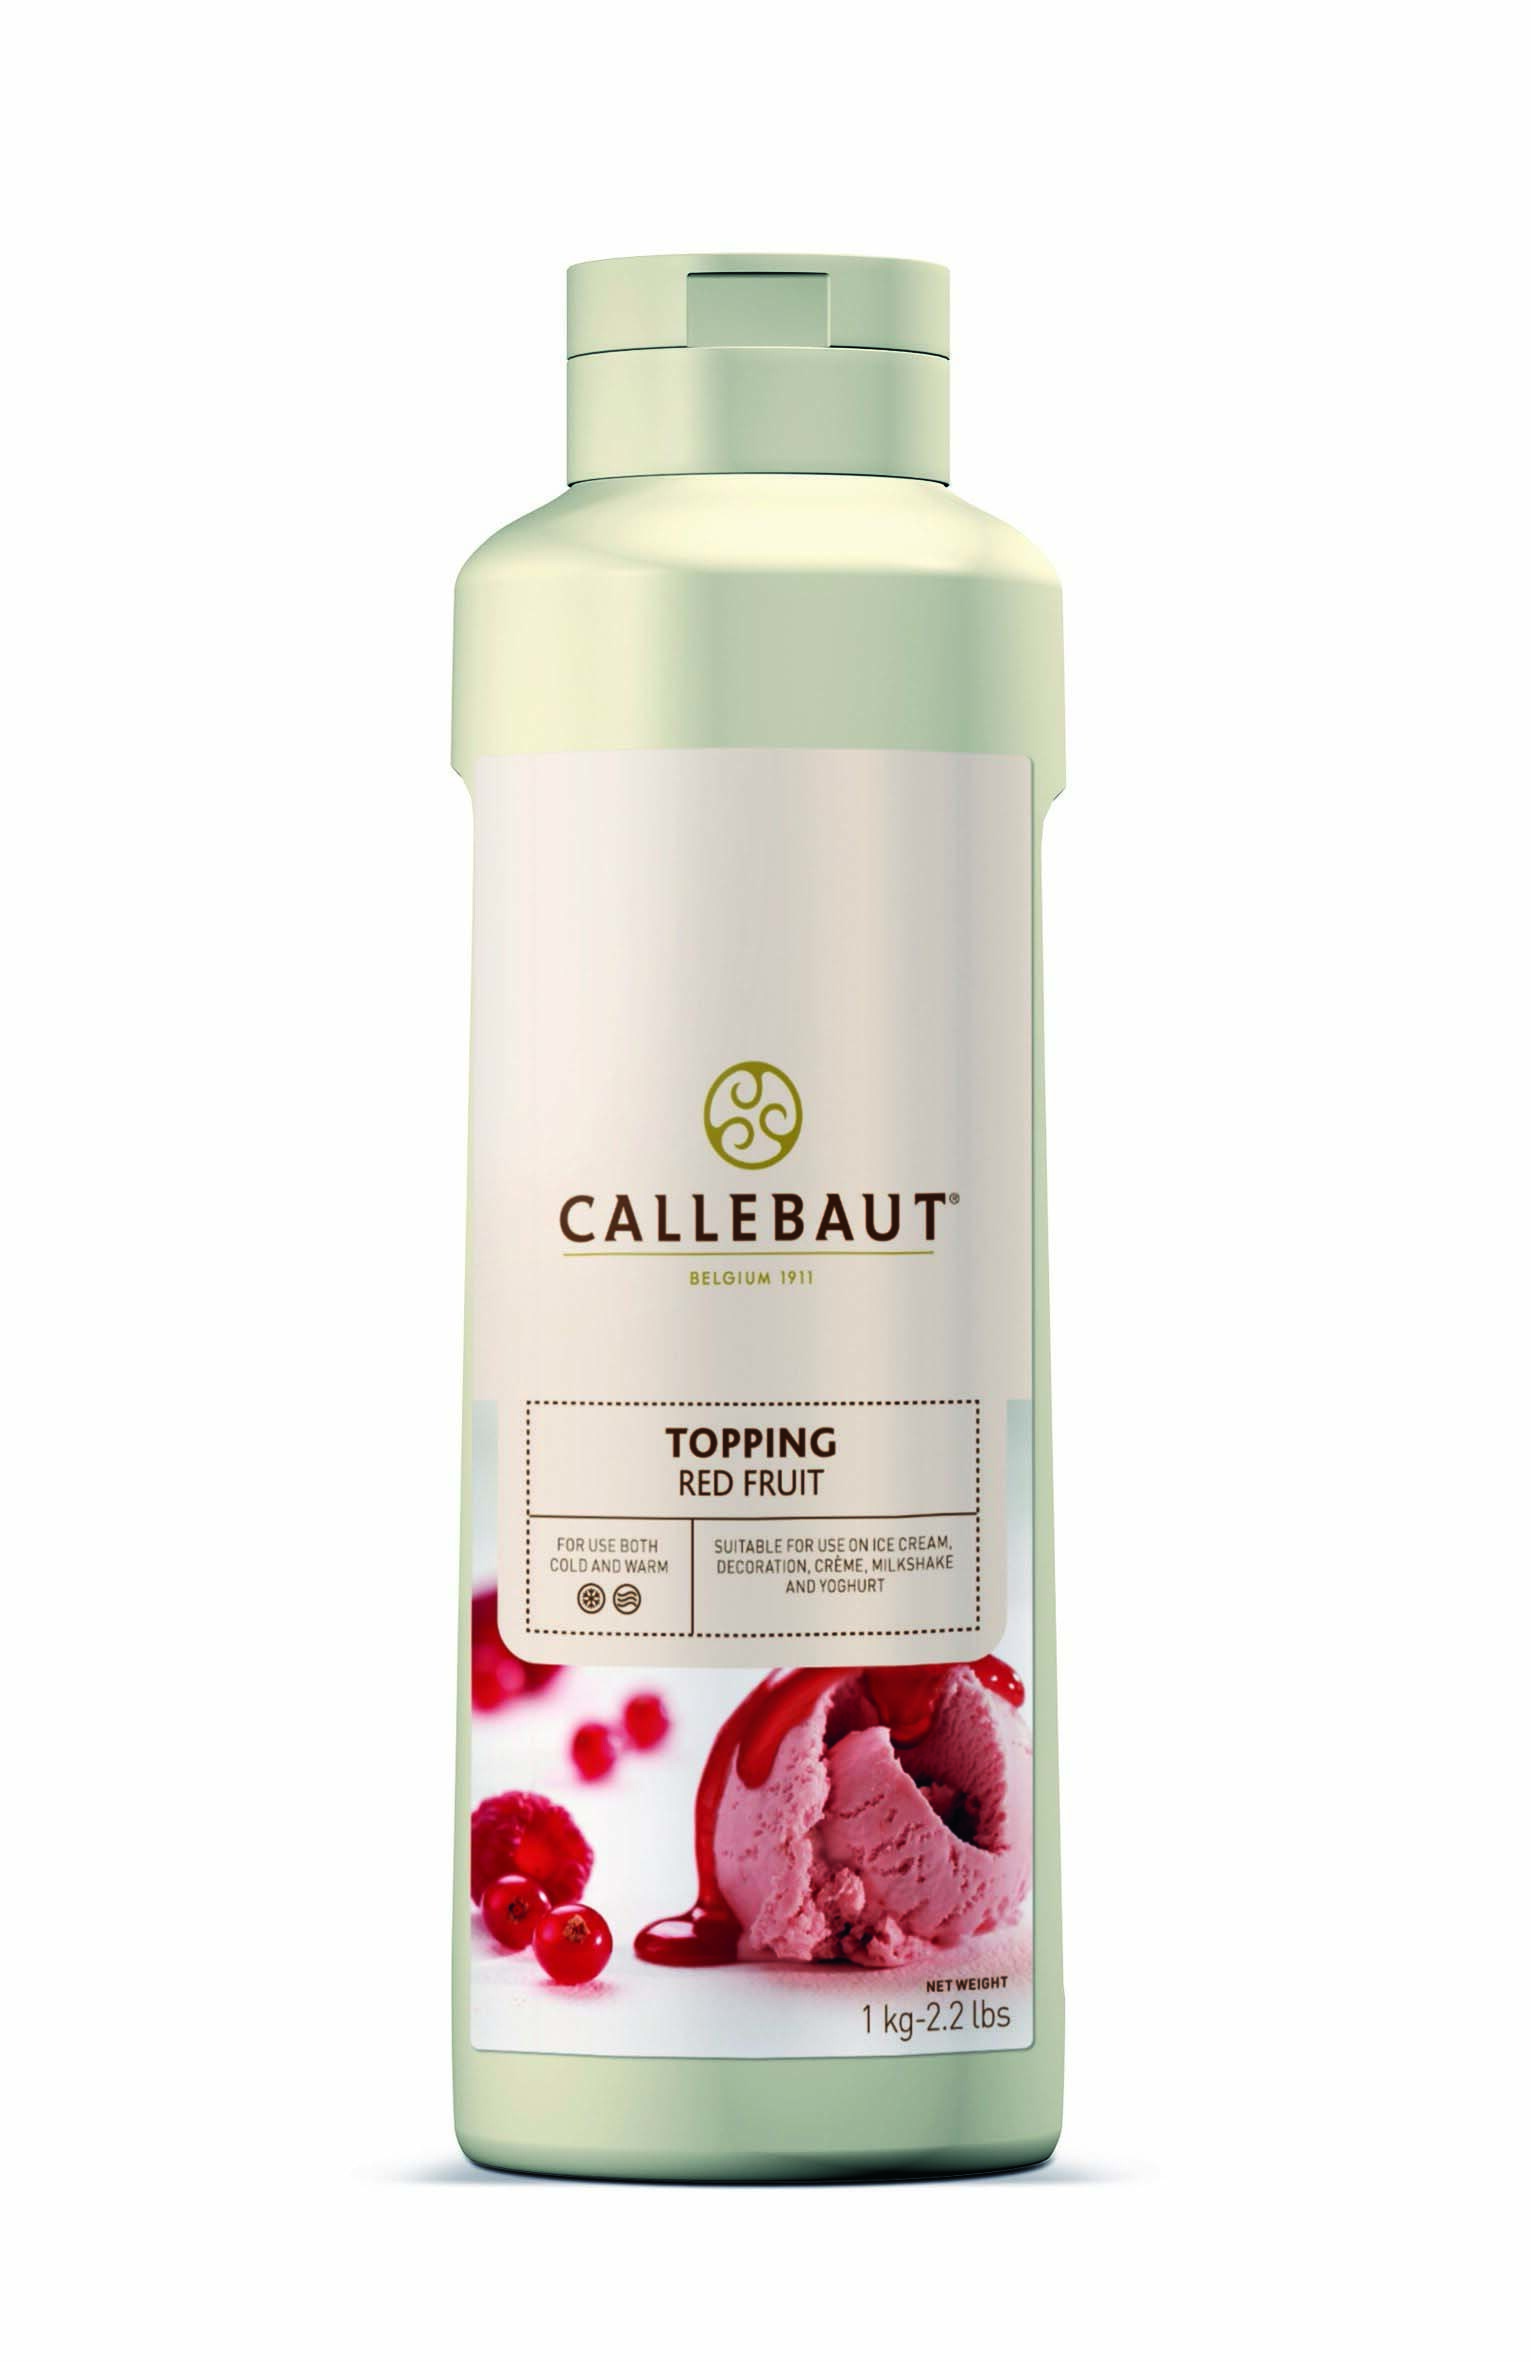 Callebaut Red Fruit Topping 1L squeezable bottle